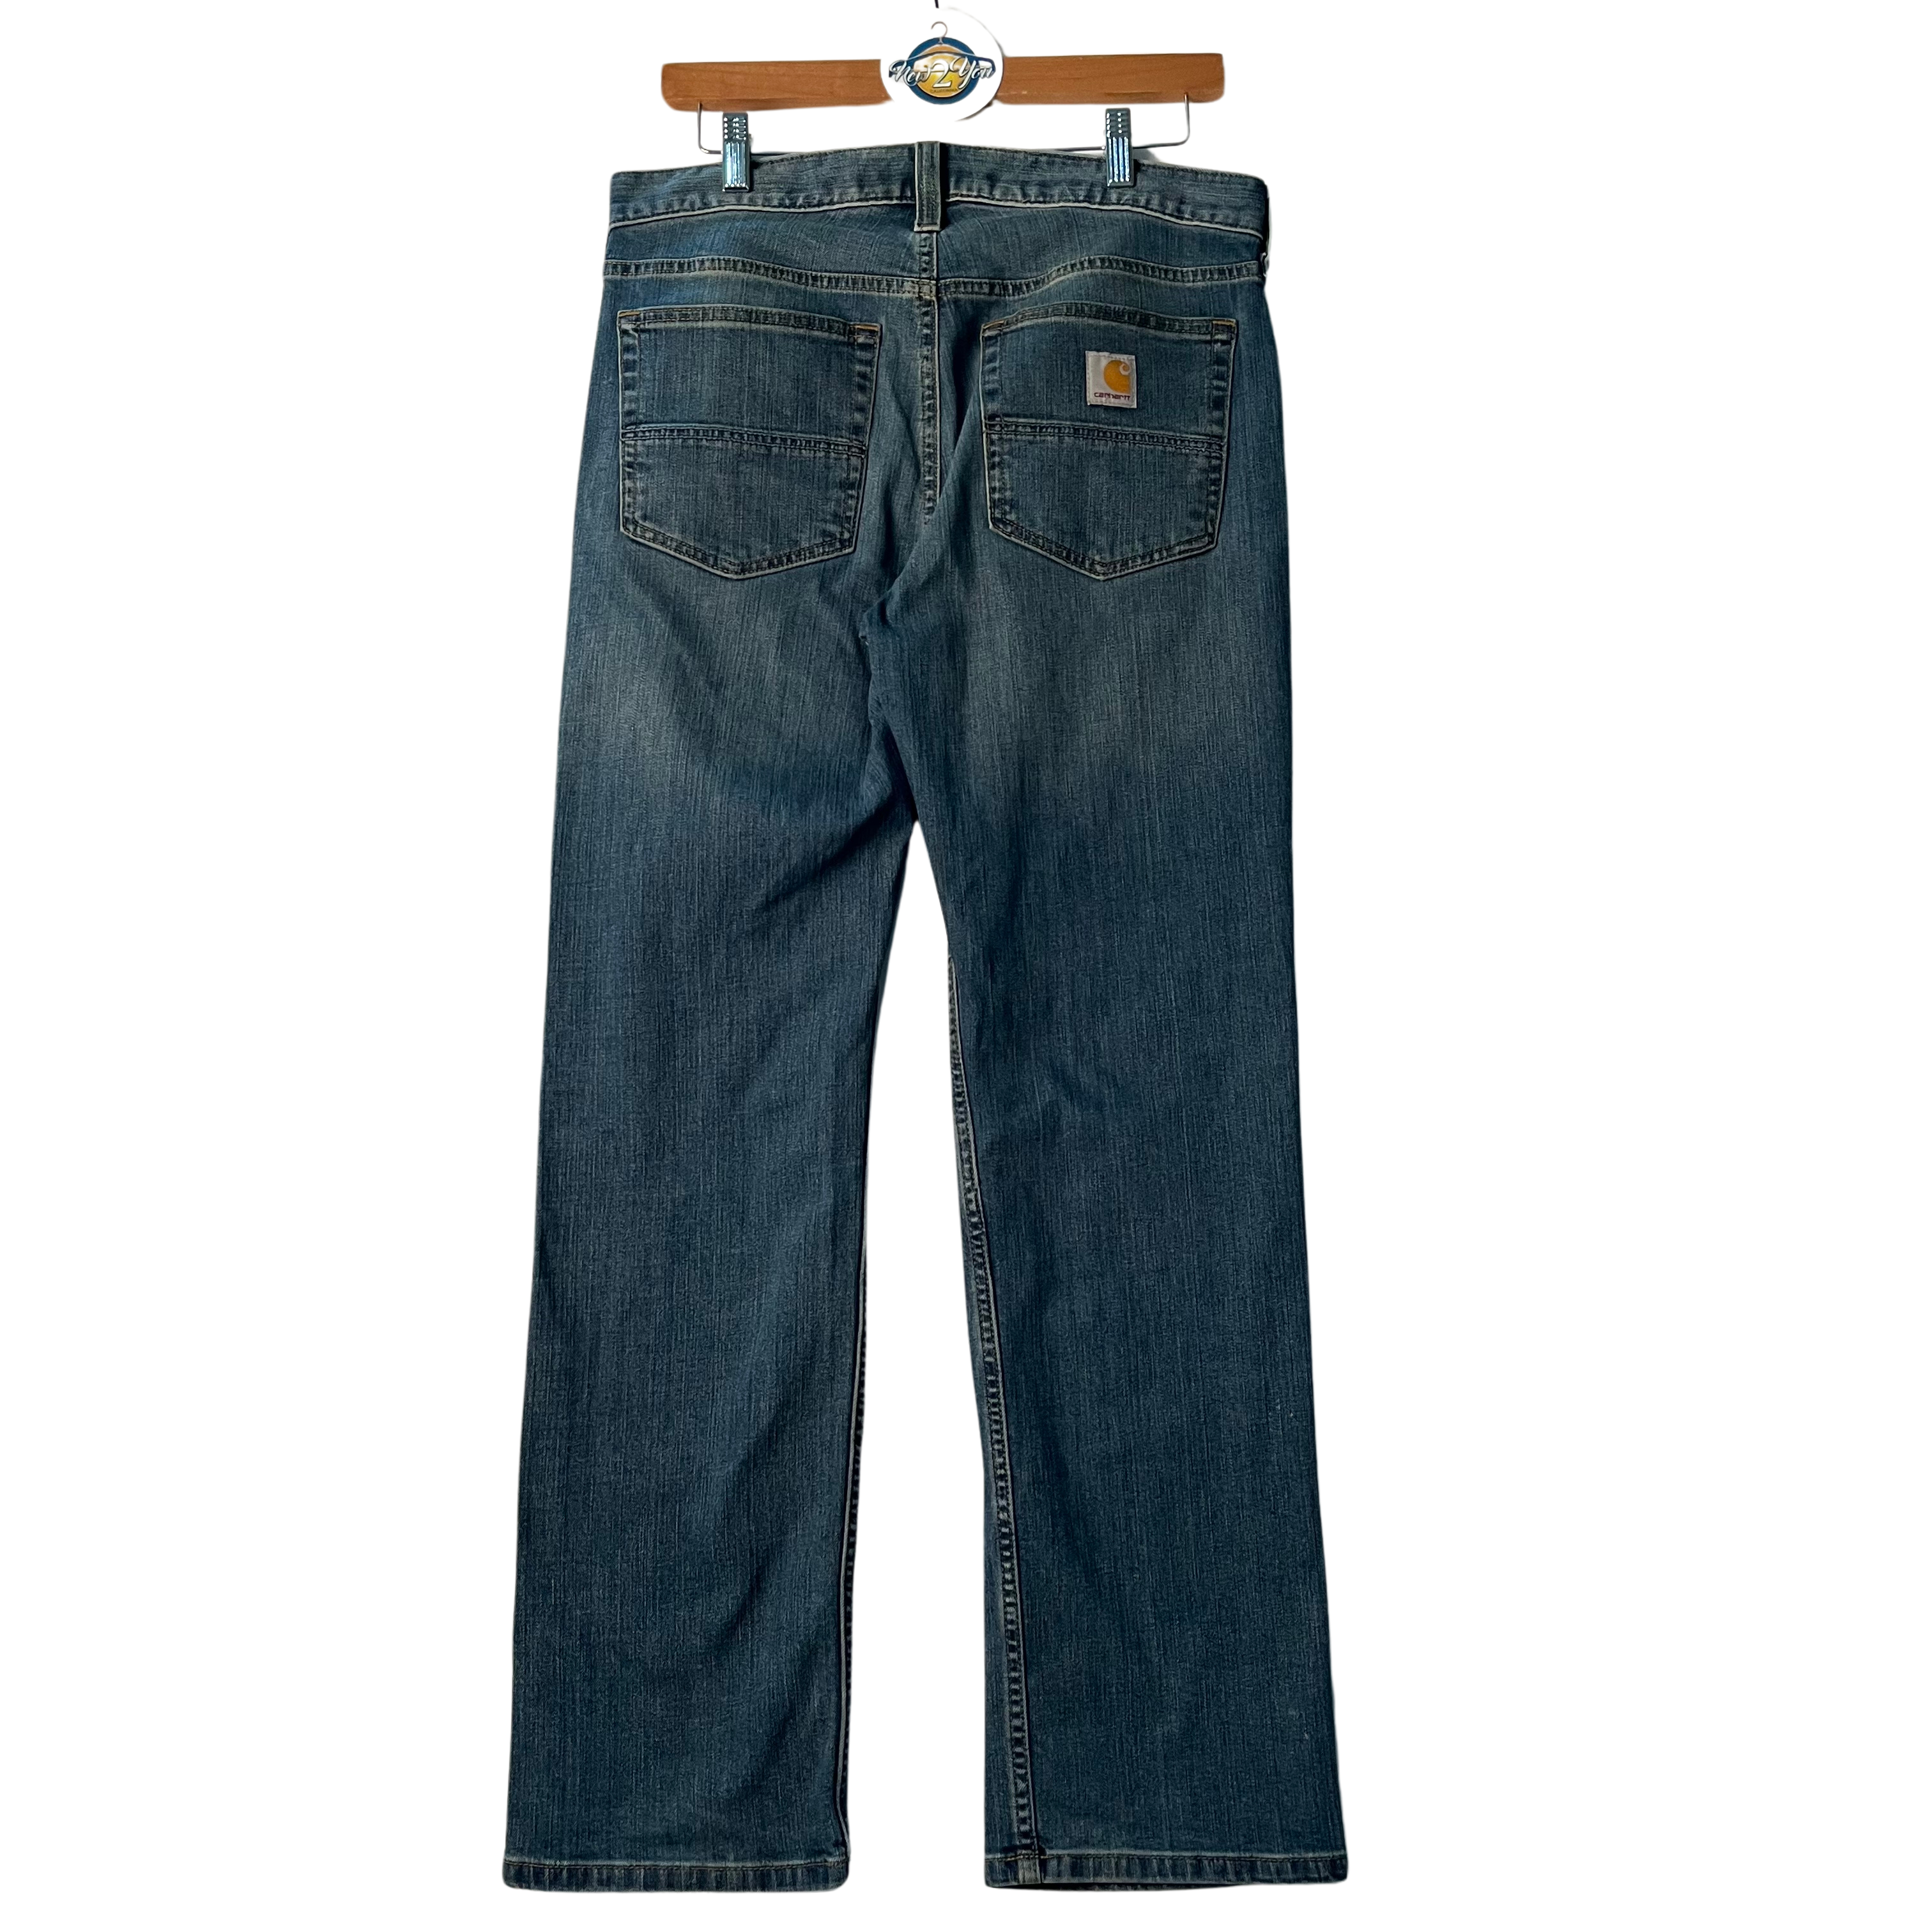 Carhart Relaxed Fit Denim